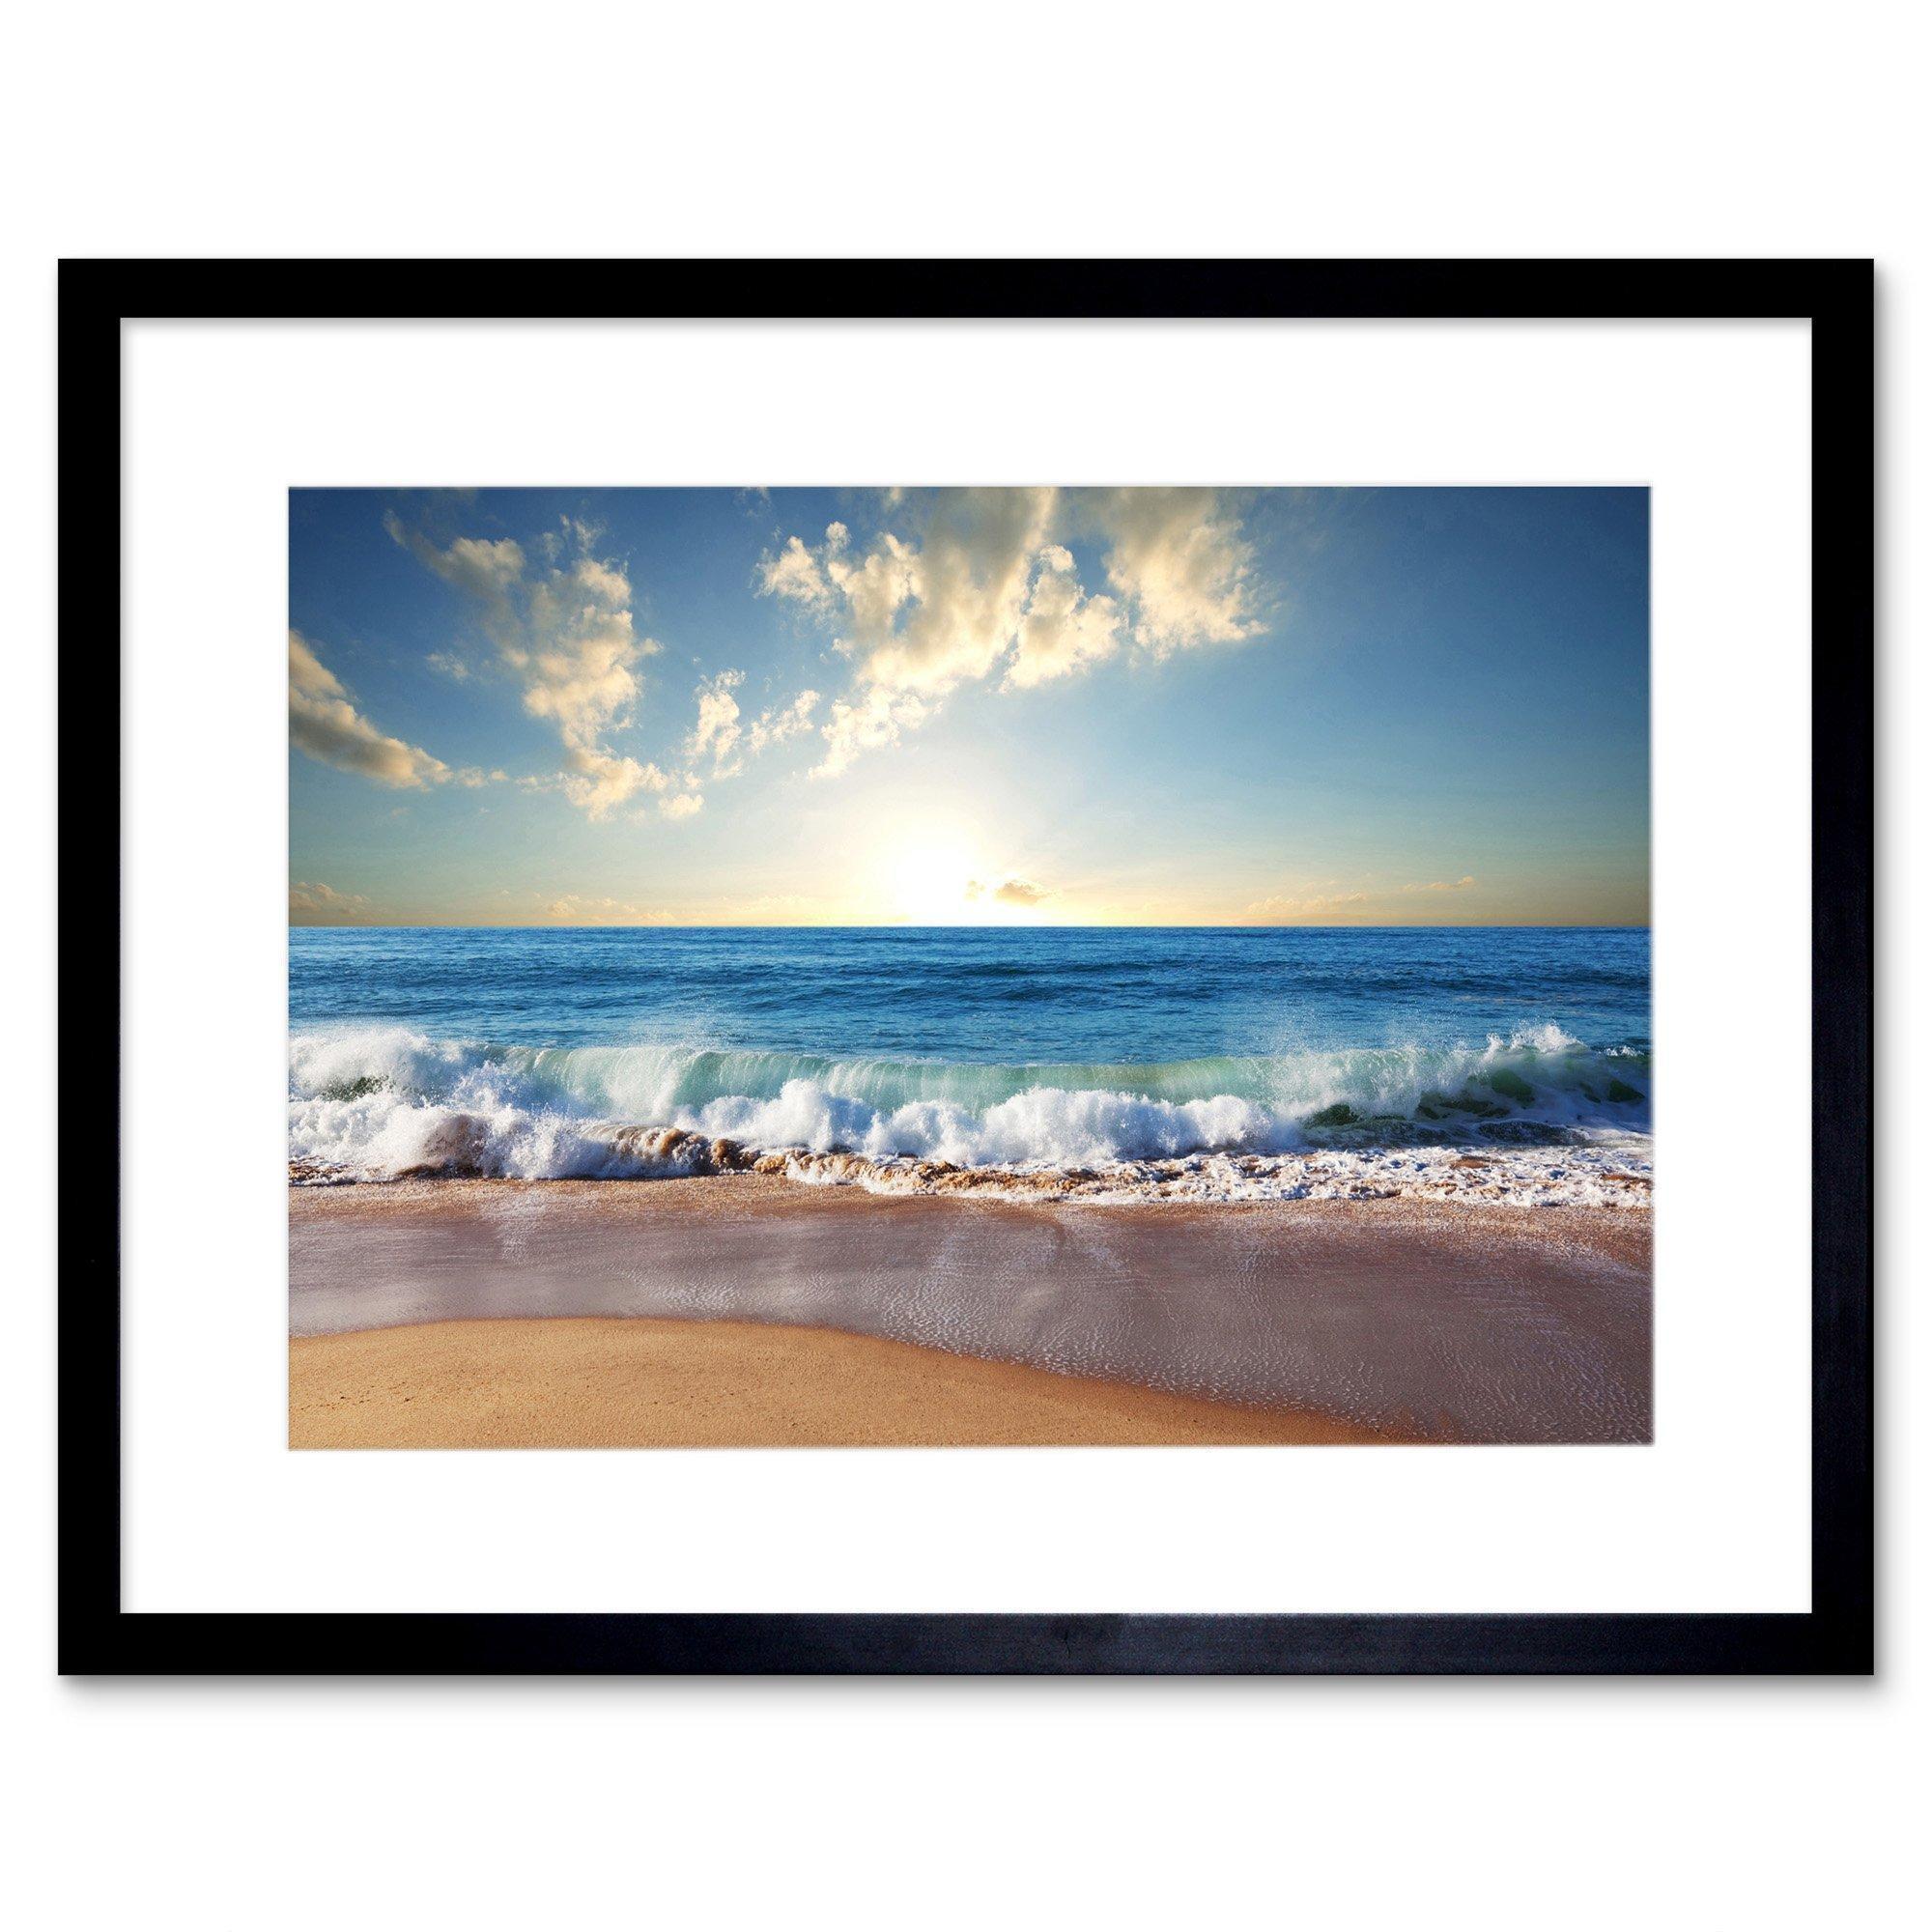 Waves Crushing at Sandy Beach Shore Ocean Sea Summer Sunny Coastal Landscape Photograph Print Framed Wall Art Print Picture 12X16 inch - image 1